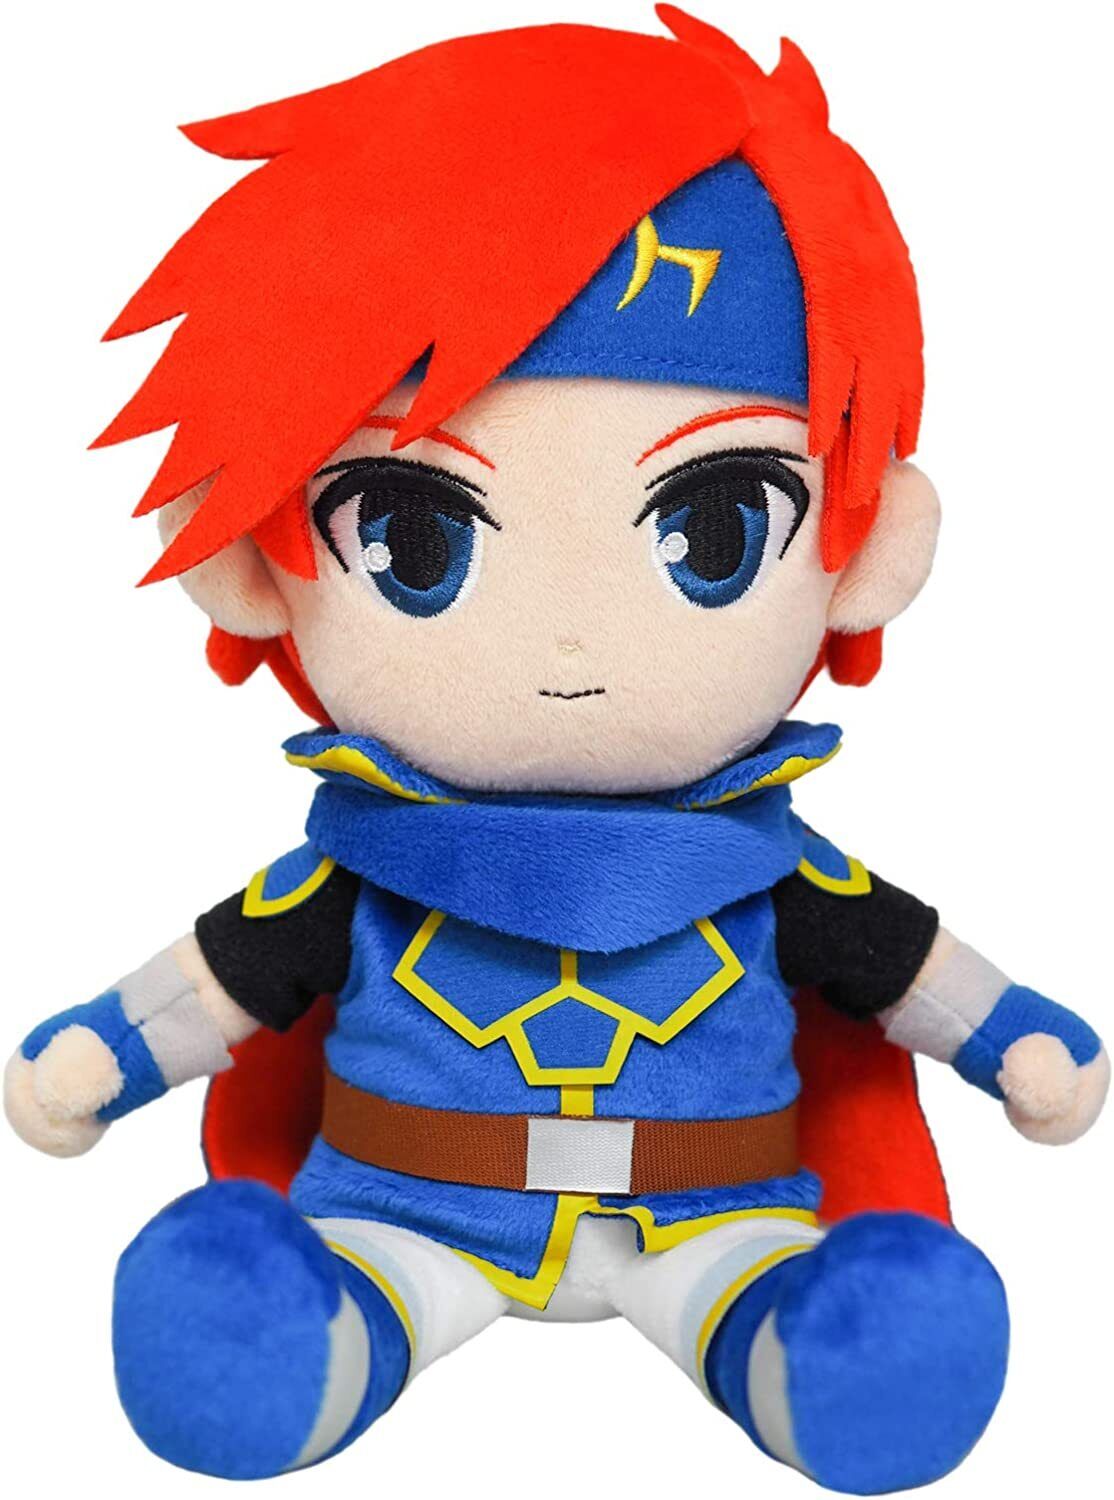 Fire Emblem ALL STAR COLLECTION Roy Plush Doll S Size 11